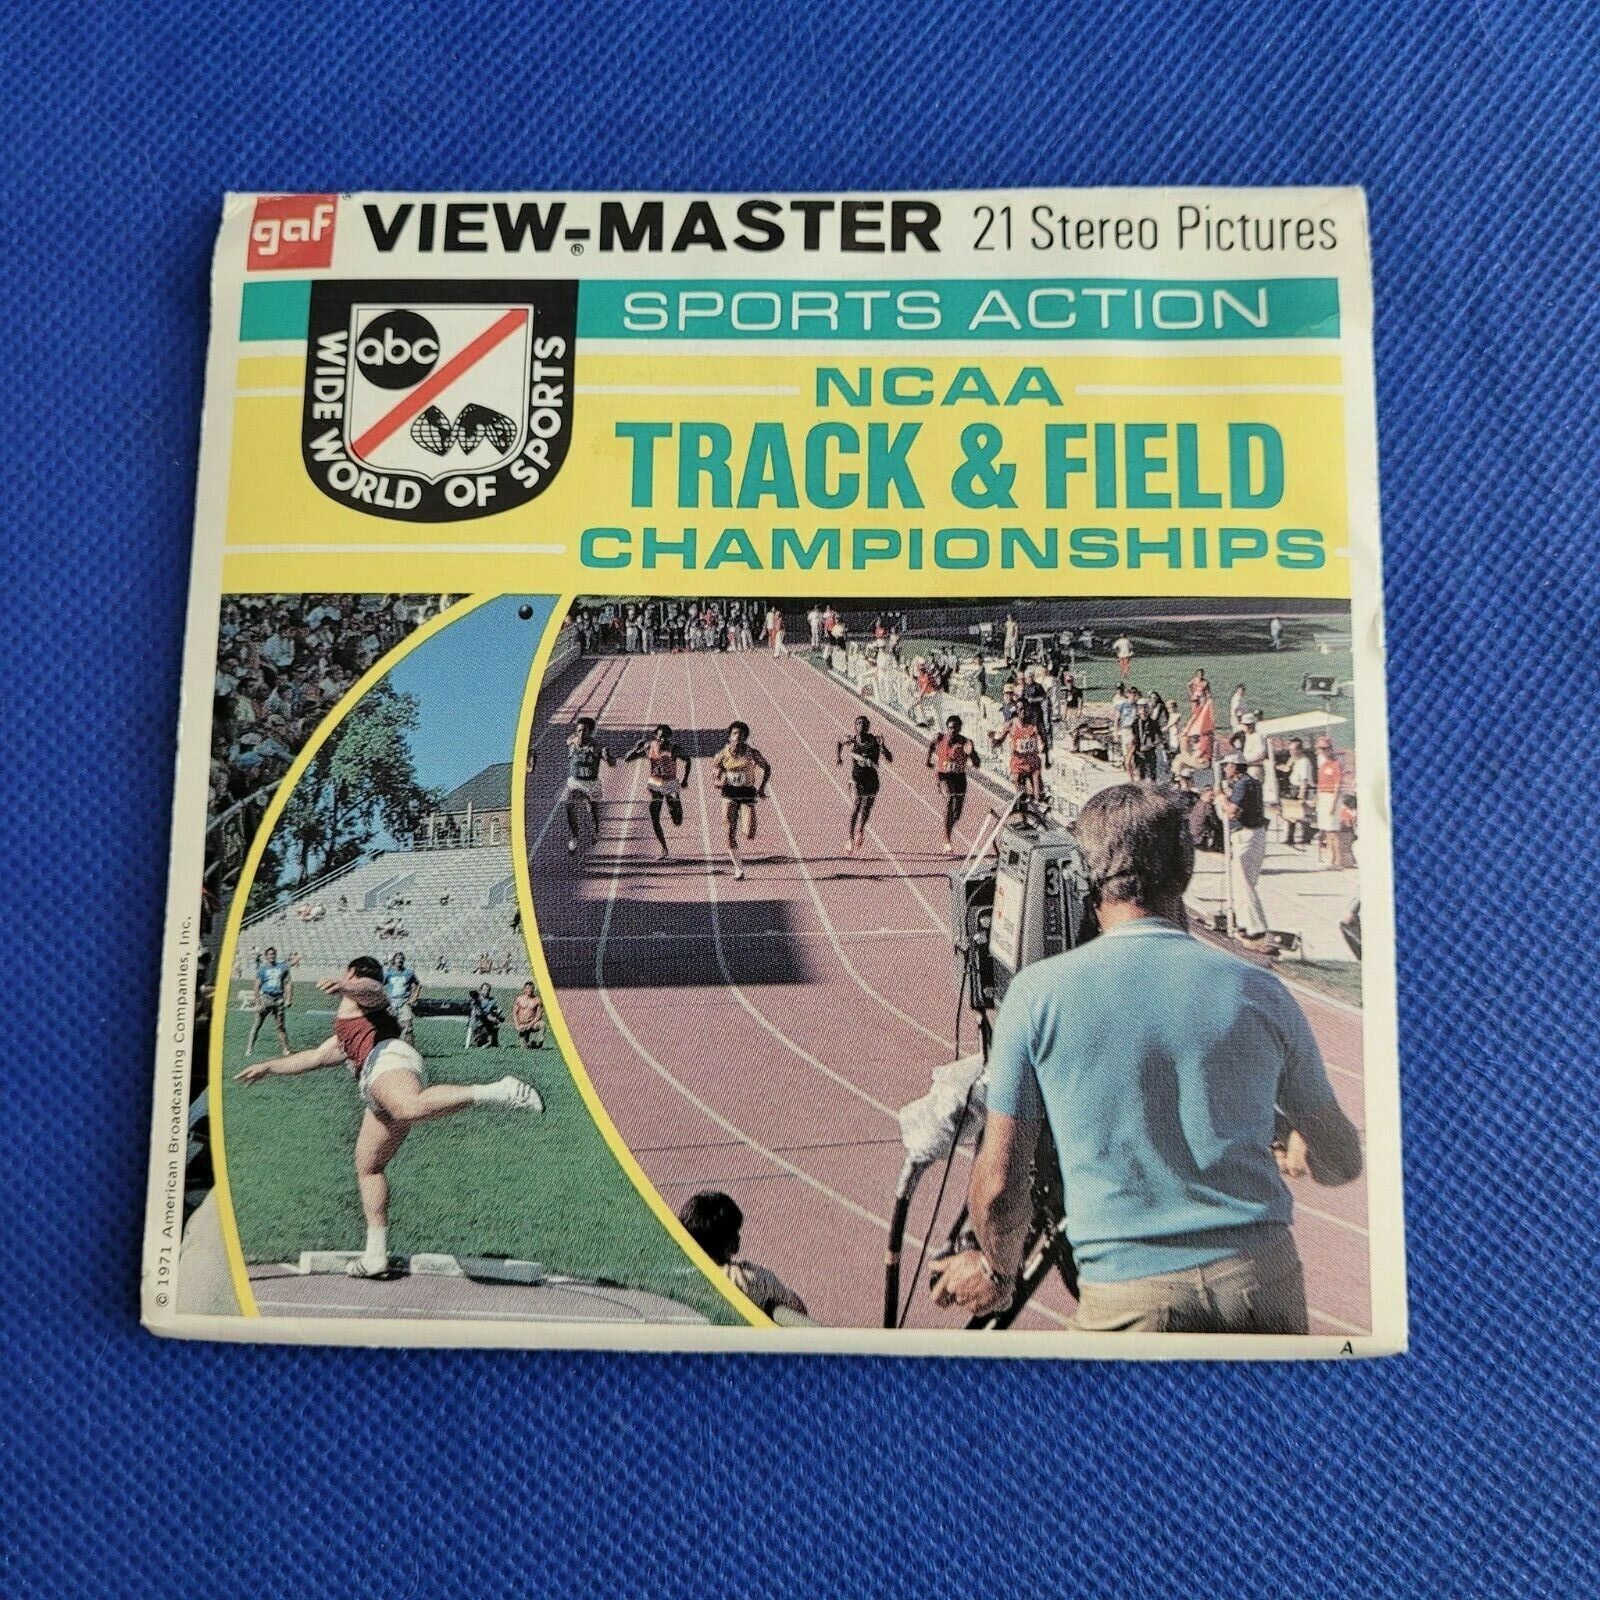 Gaf Sports Action B935 NCAA Track & Field Iowa 1971 view-master 3 reels packet